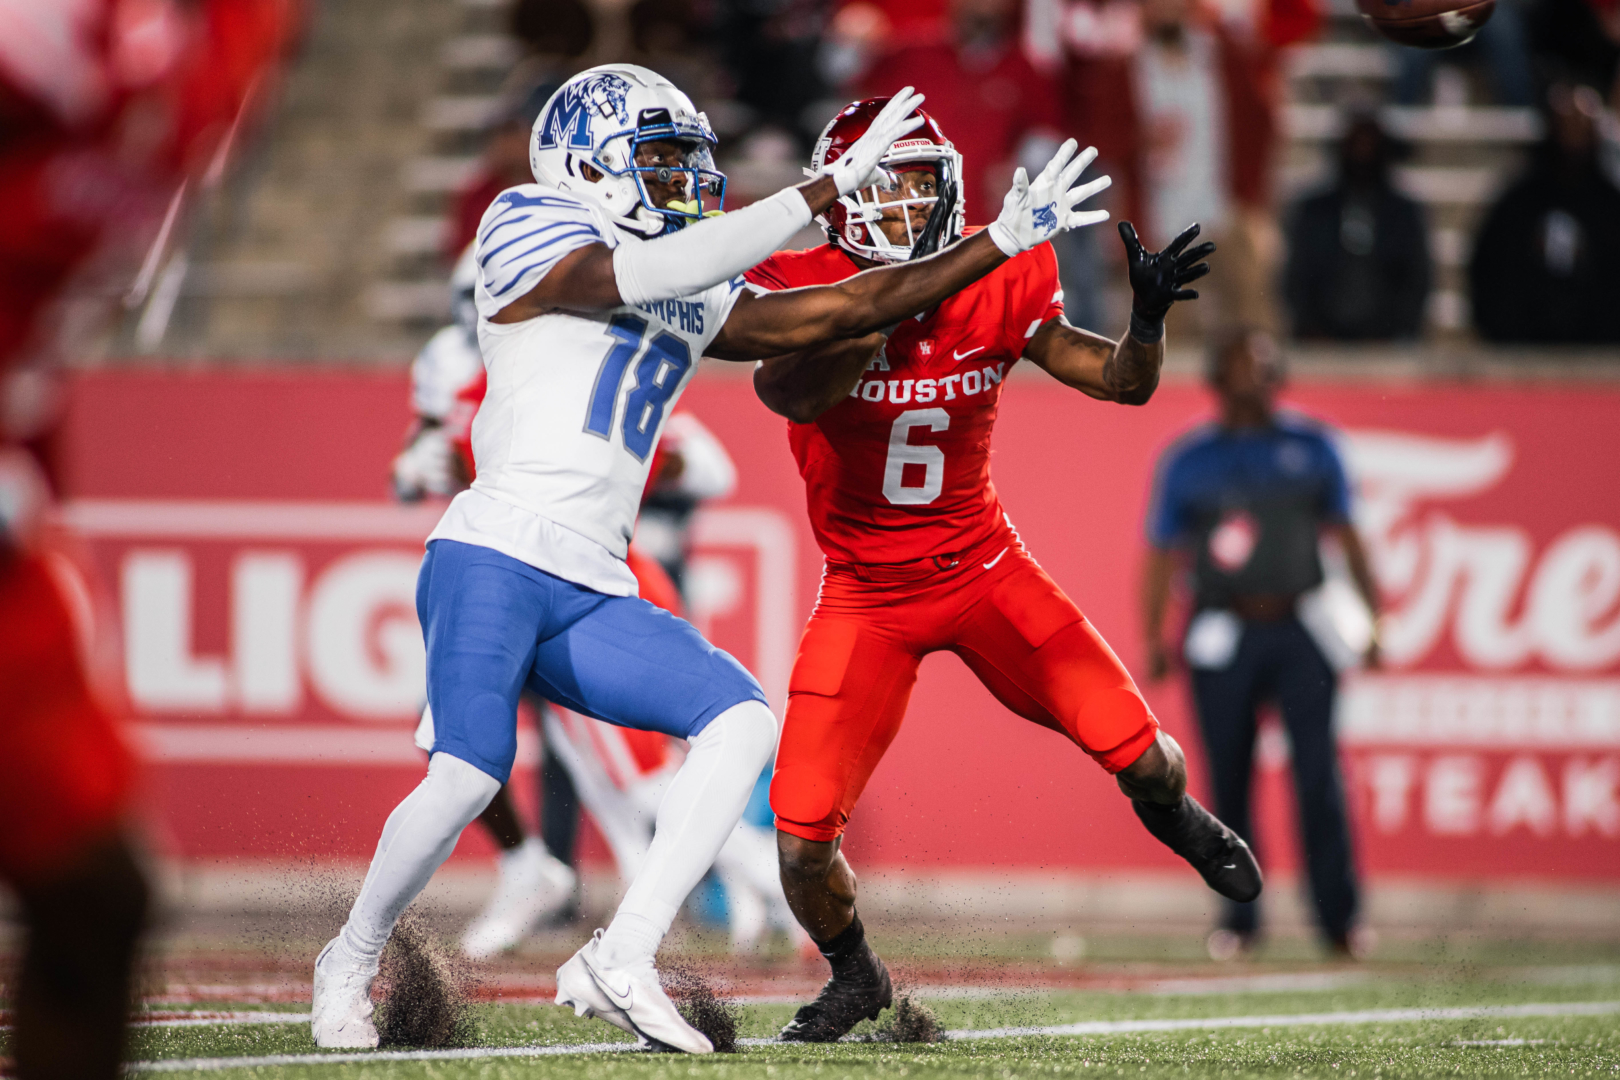 The UH secondary took a tremendous leap from in the 2021 football season, they totaled 14 interceptions and ranked 18th in the nation in passing yards allowed per game. | James Schillinger/The Cougar